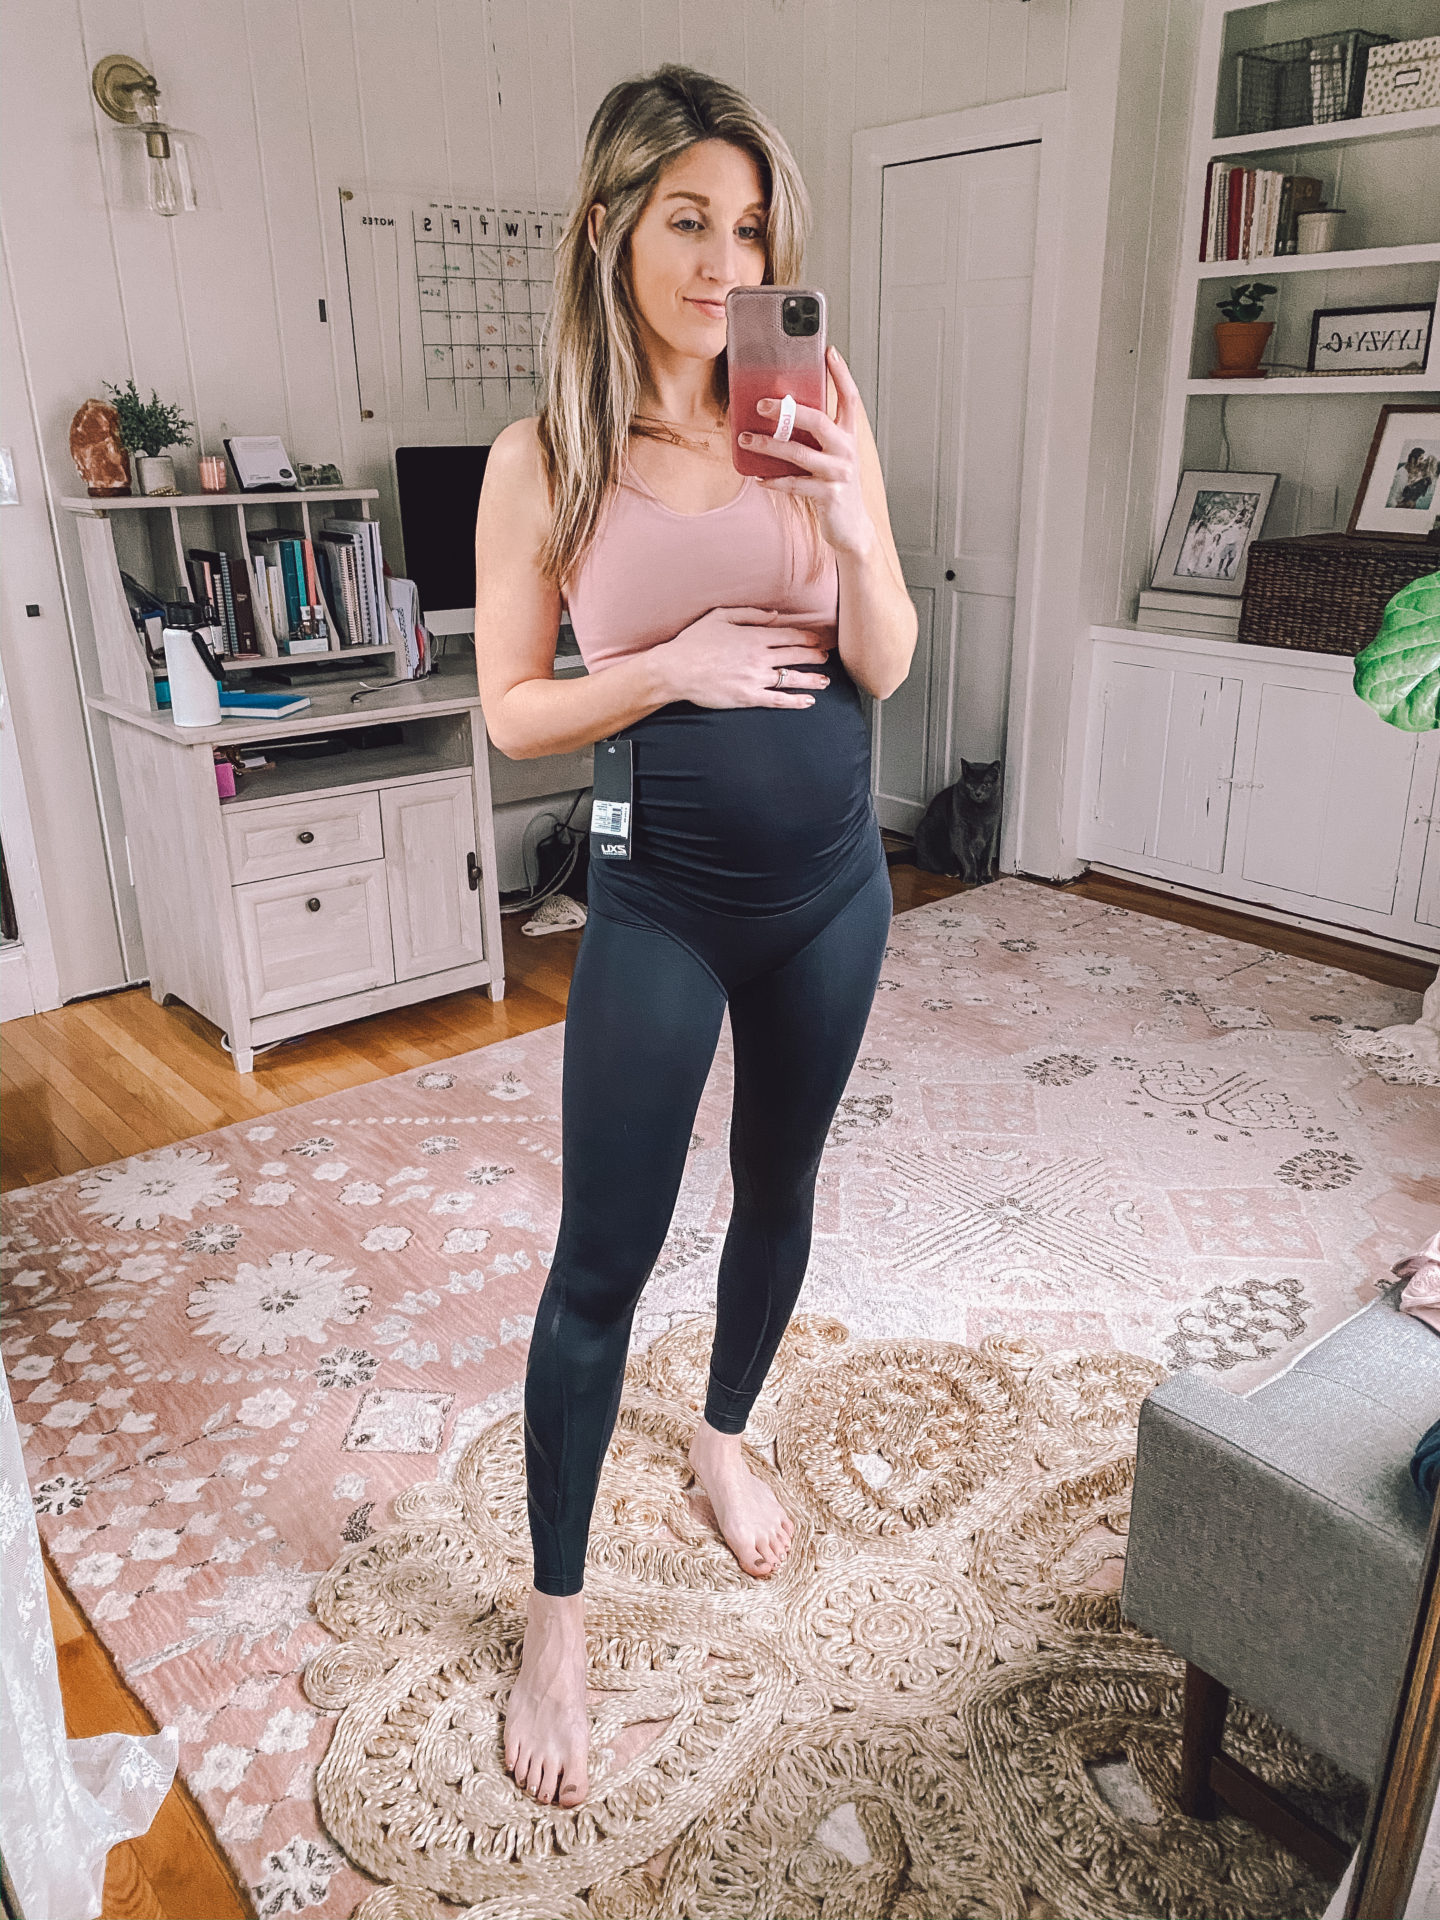 Tryto Active  in depth legging review 